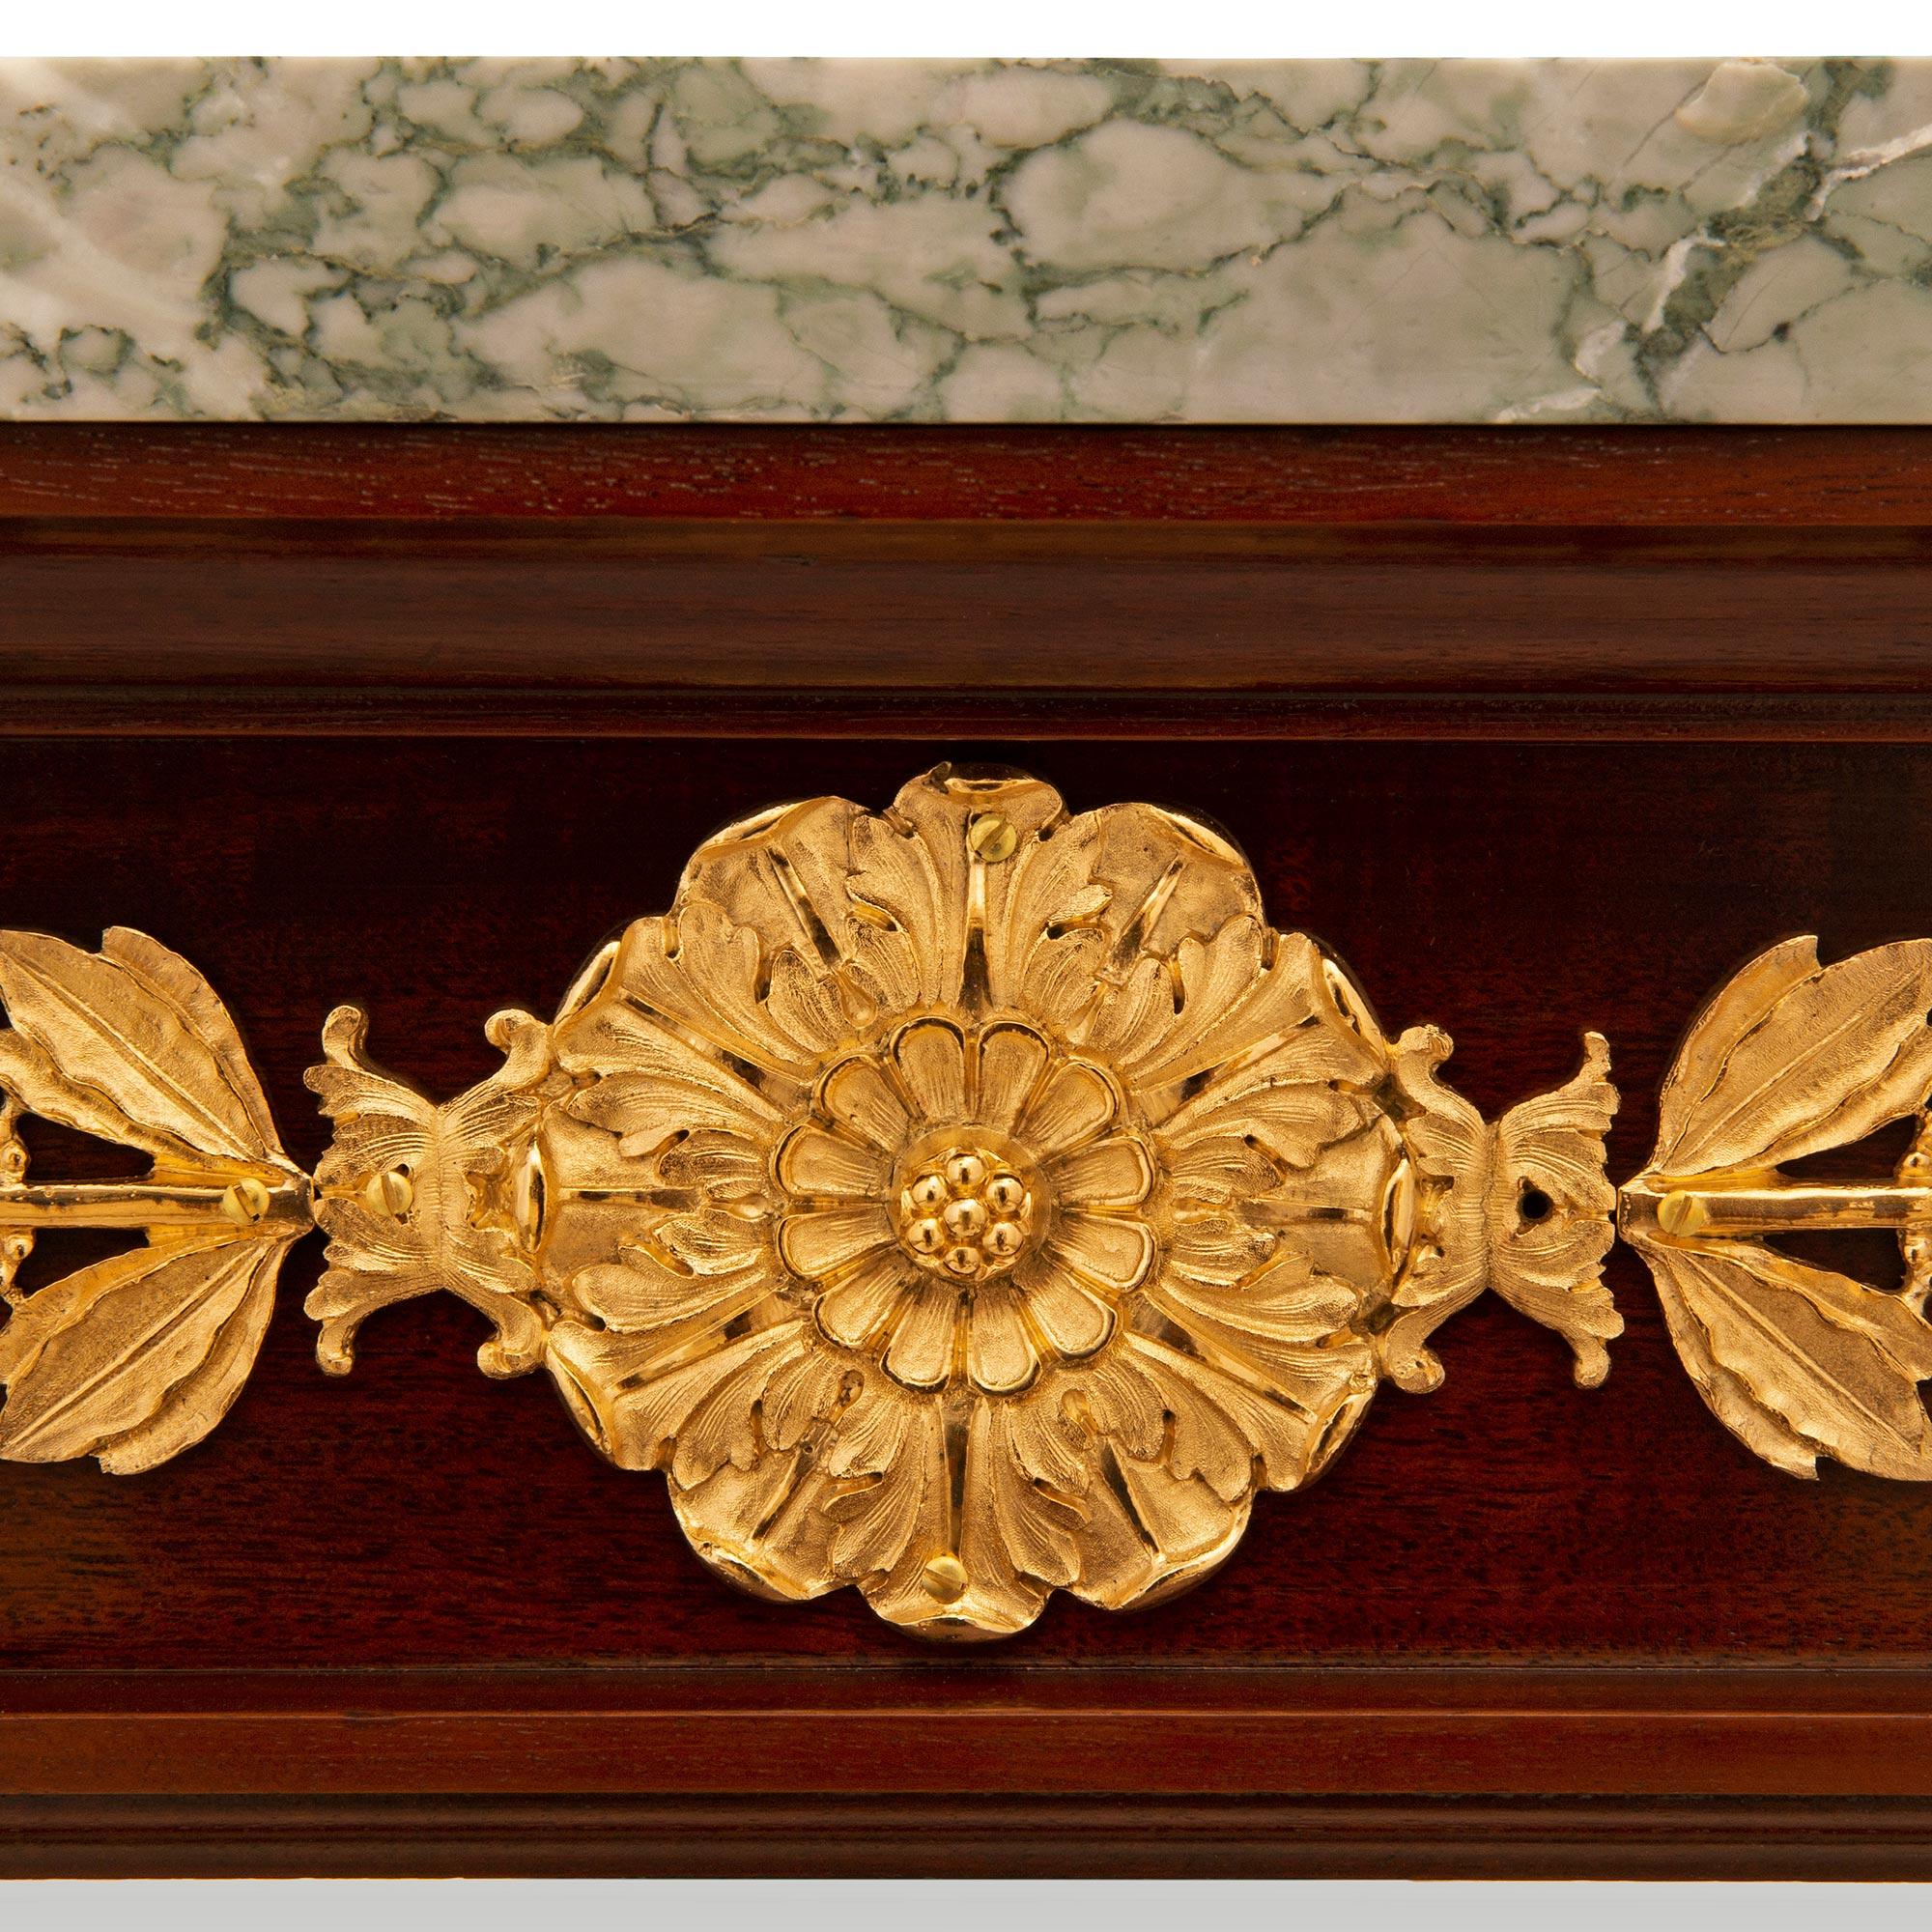 French 19th Century Empire St. Mahogany, Ormolu And Vert Campan Marble Console For Sale 4